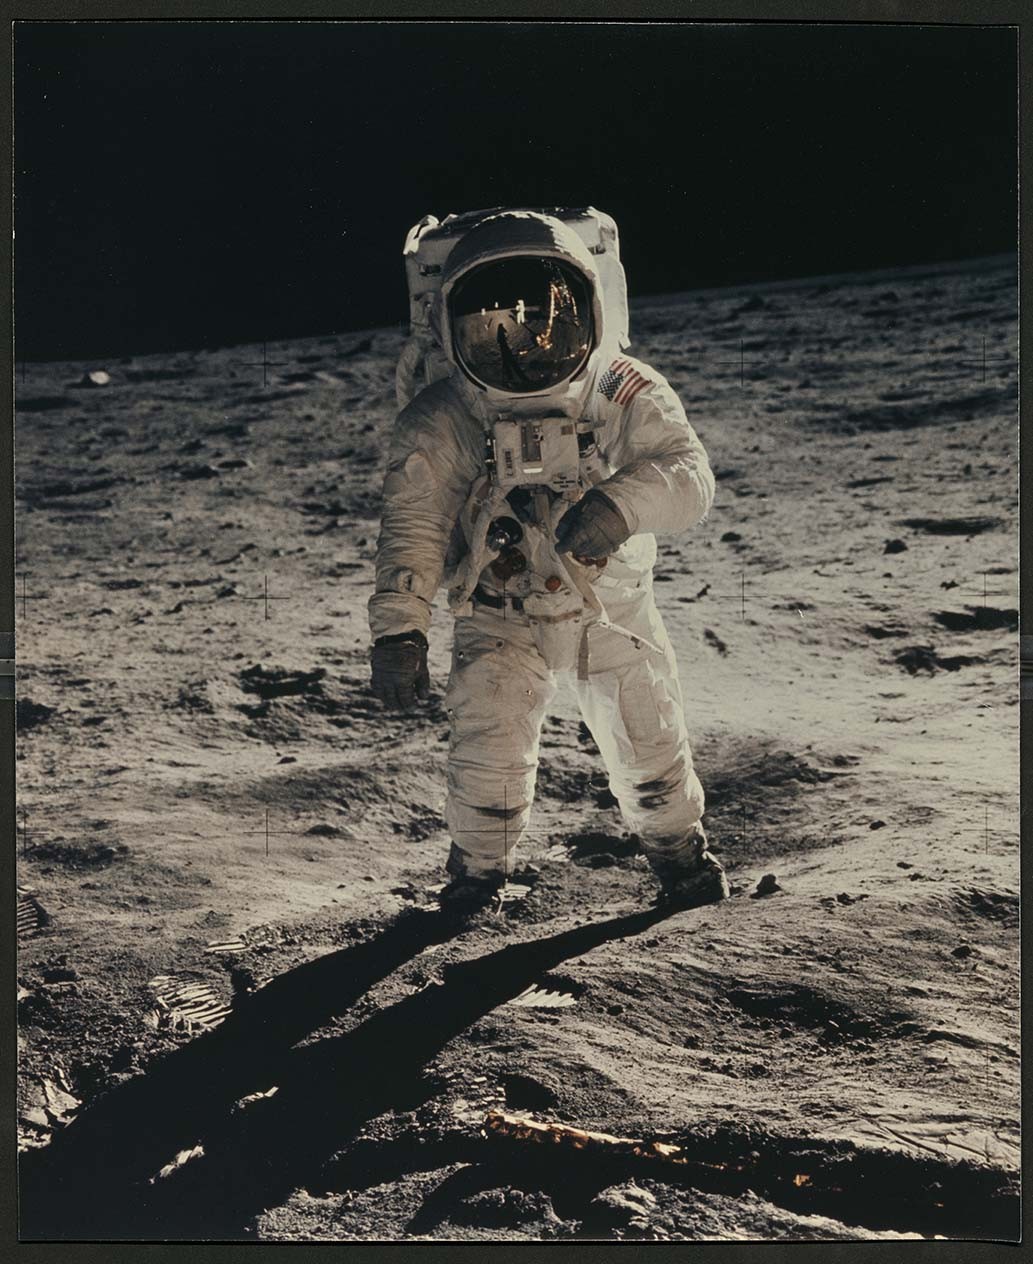 Photograph of Buzz Aldrin From the First Manned Lunar Landing, from the APS Library 